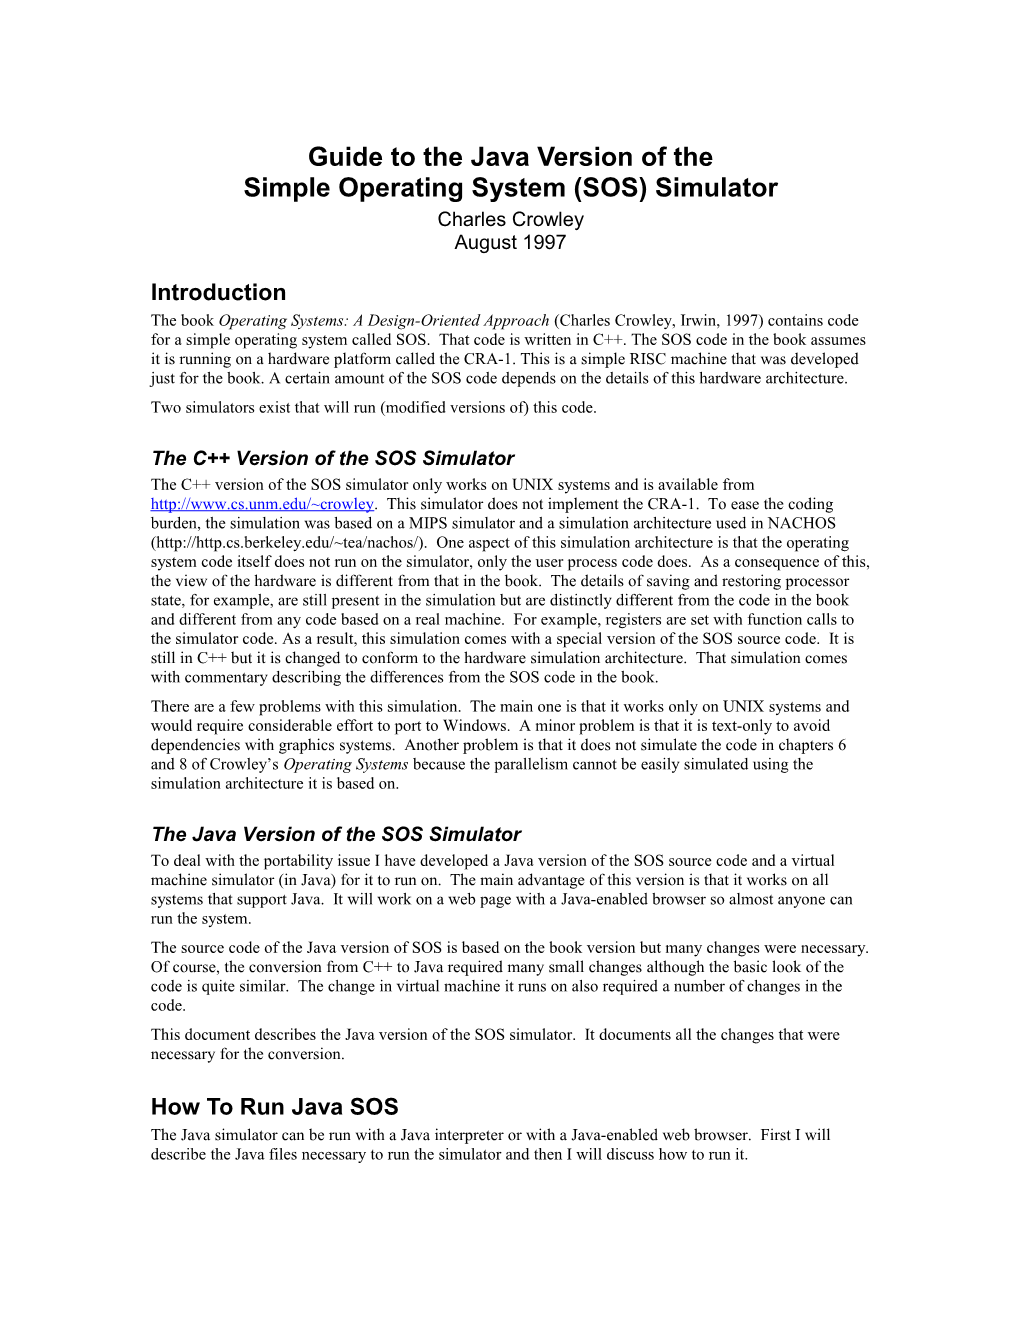 Guide to the Java Version of the Simple Operating System (SOS) Simulator